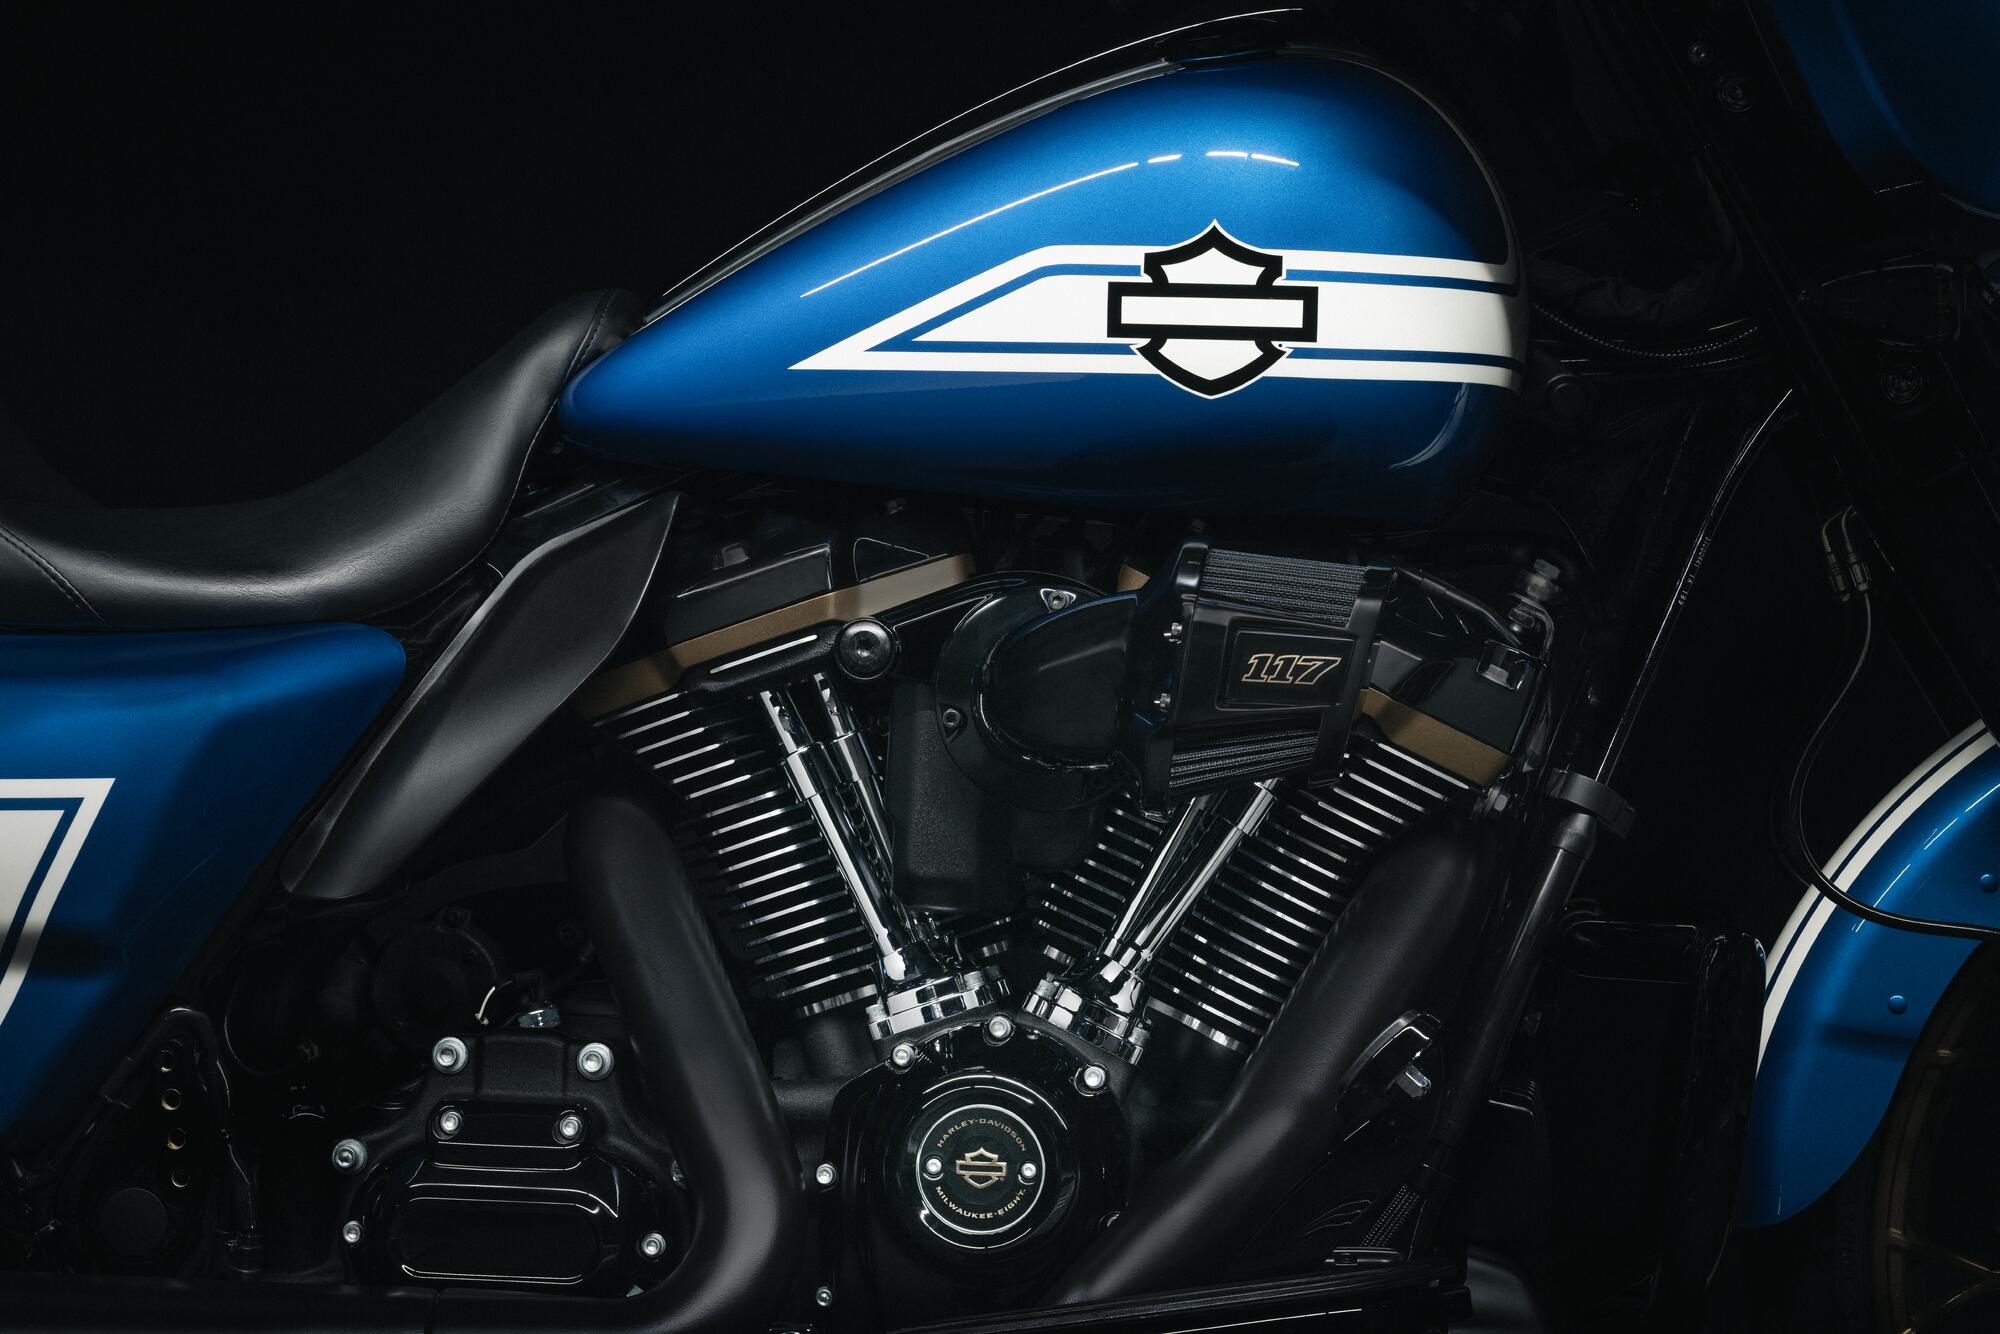 The new 2023 Harley-Davidson Fast Johnnie Enthusiast Motorcycle Collection - Road Glide ST